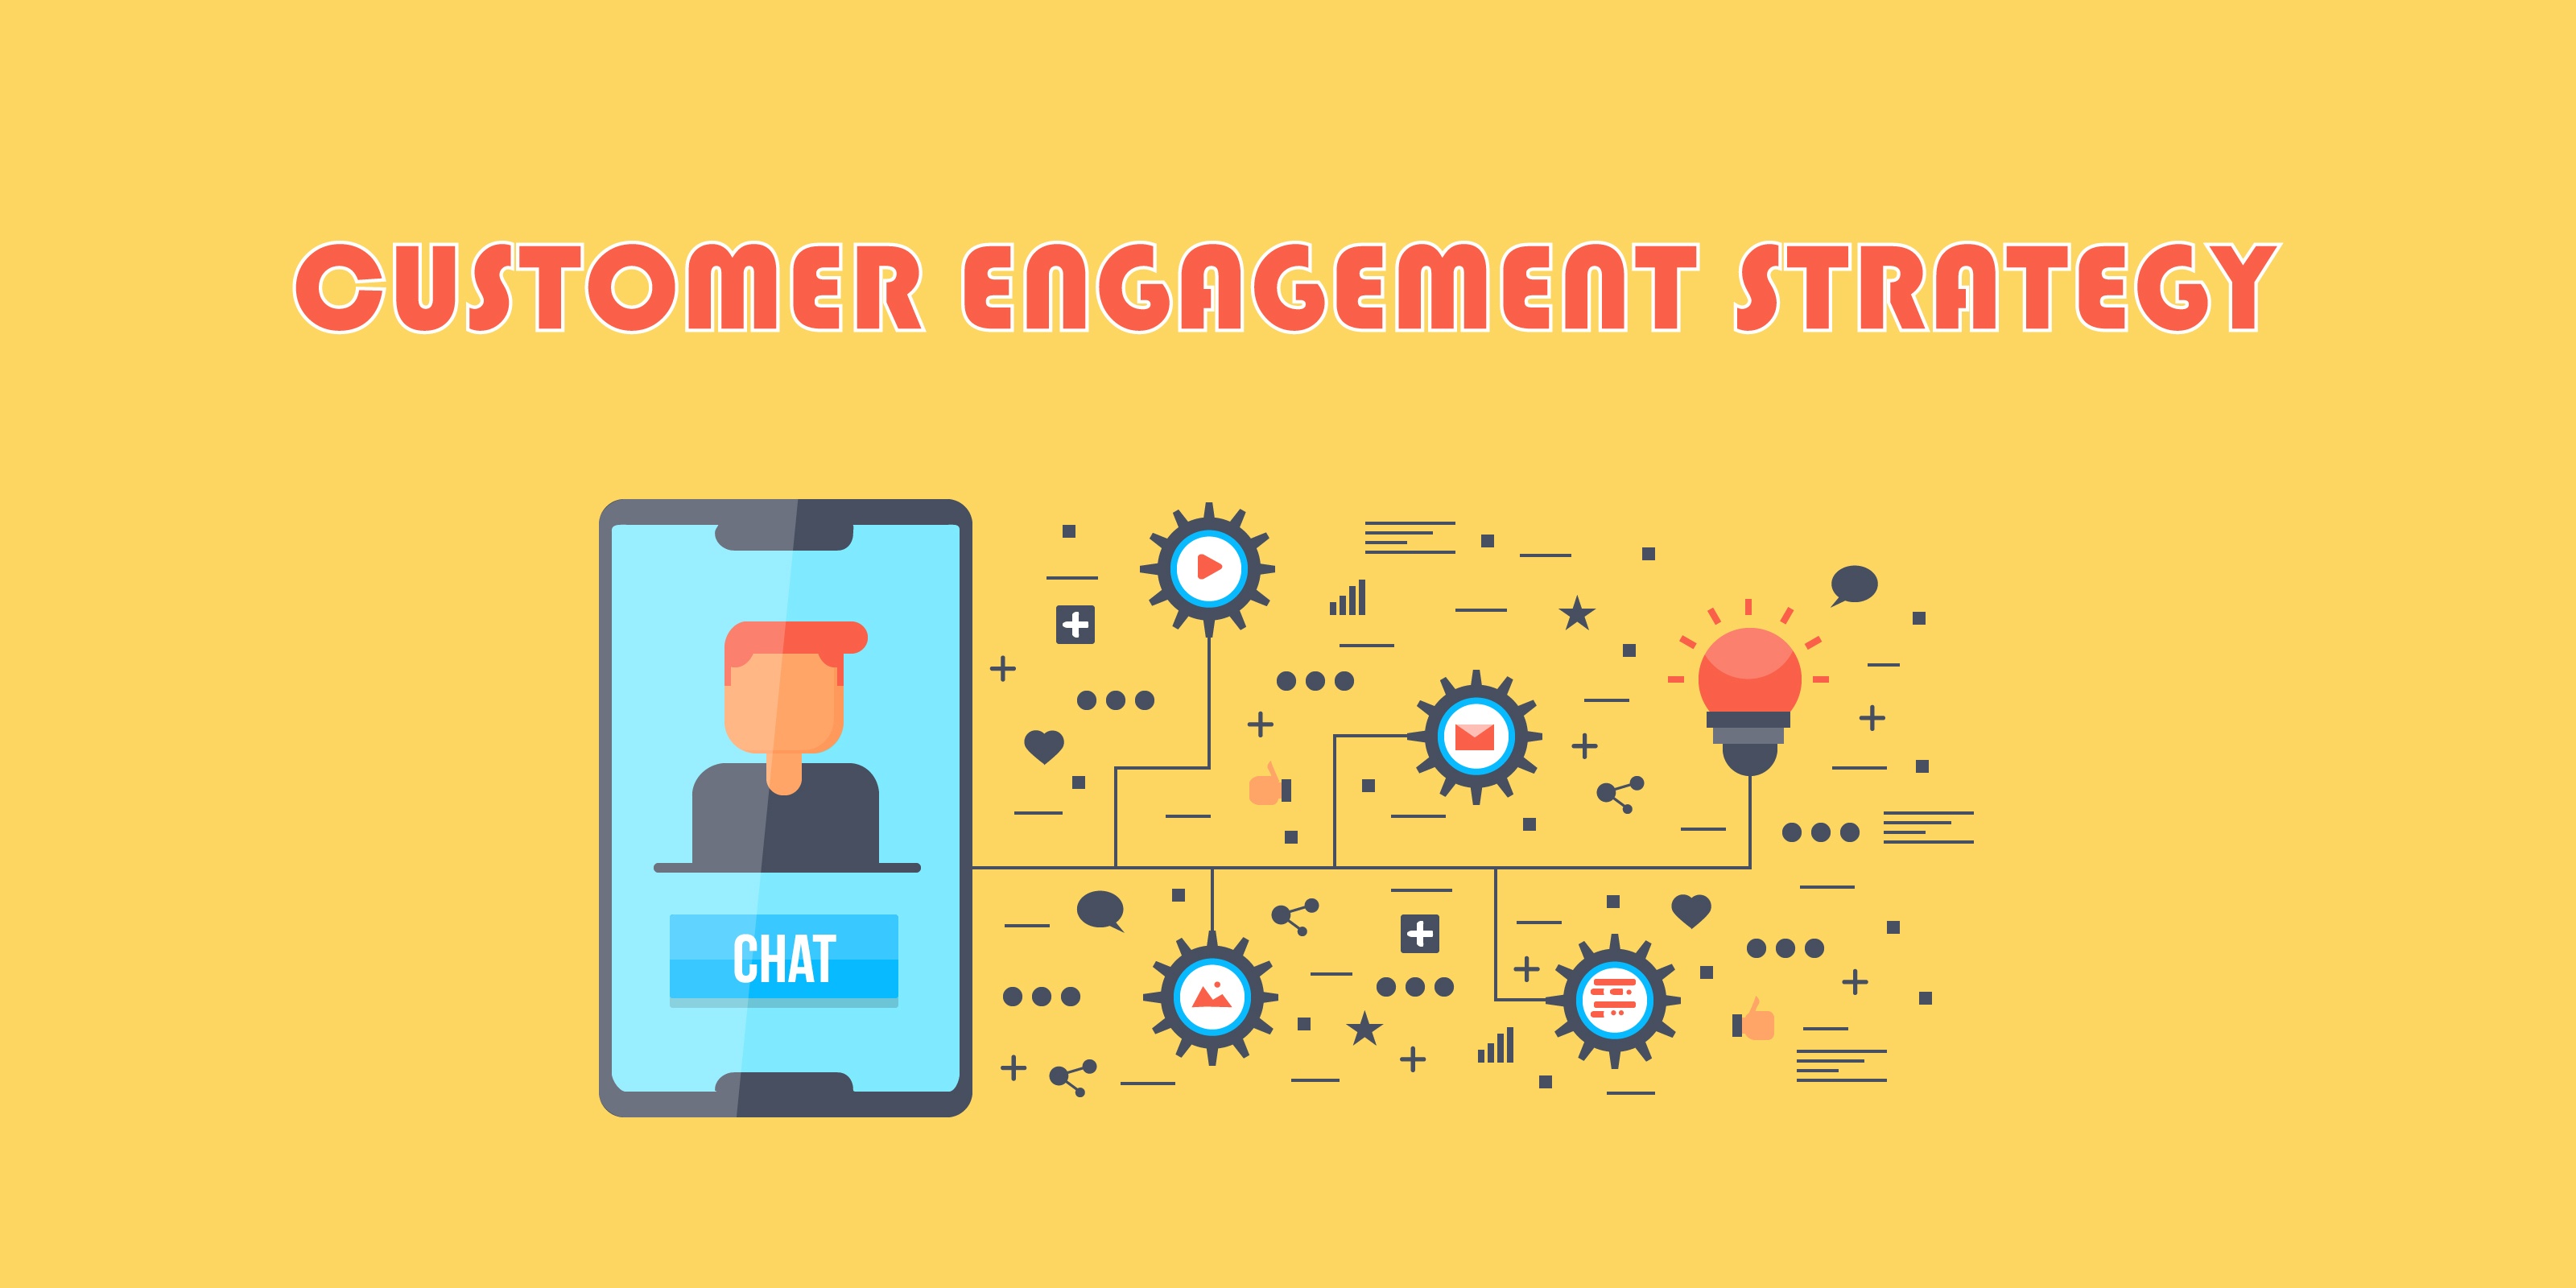 Step-By-Step Guide for an Effective Customer Engagement Strategy